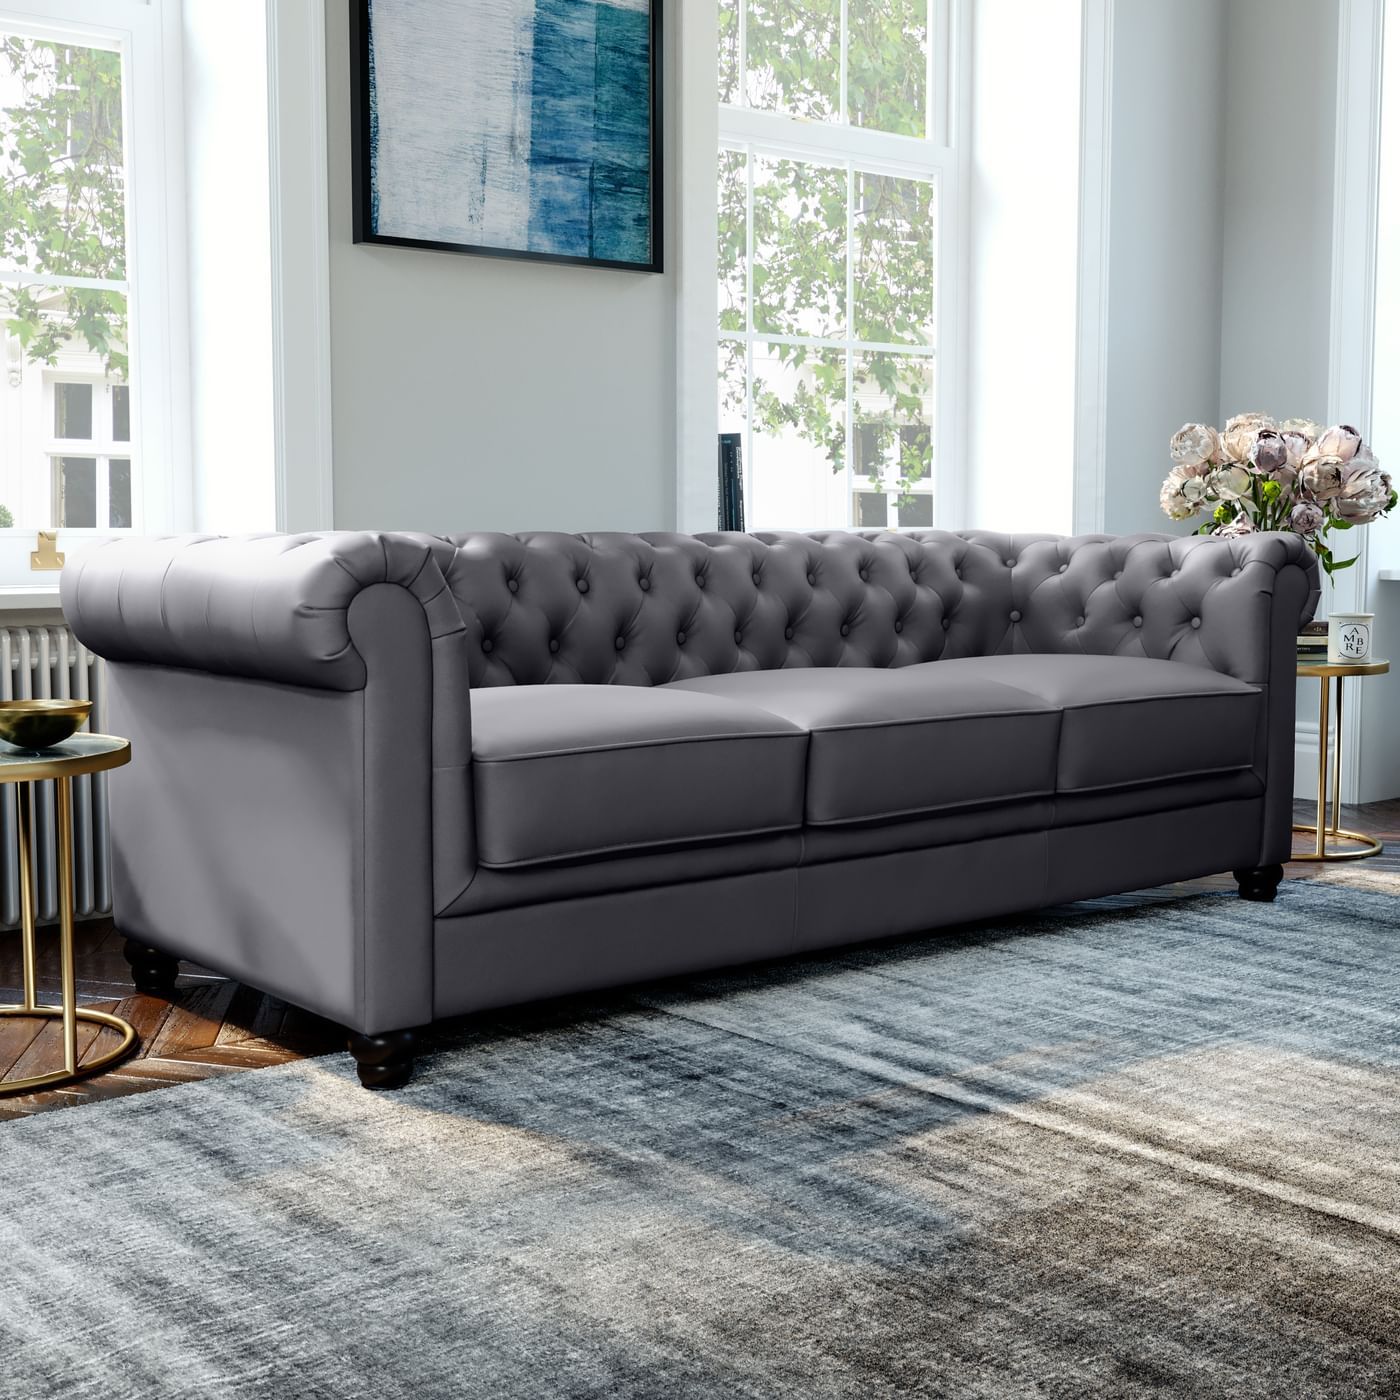 Hampton Grey Leather 3 Seater Chesterfield Sofa | Furniture Choice With Regard To Sofas In Dark Grey (Gallery 11 of 20)